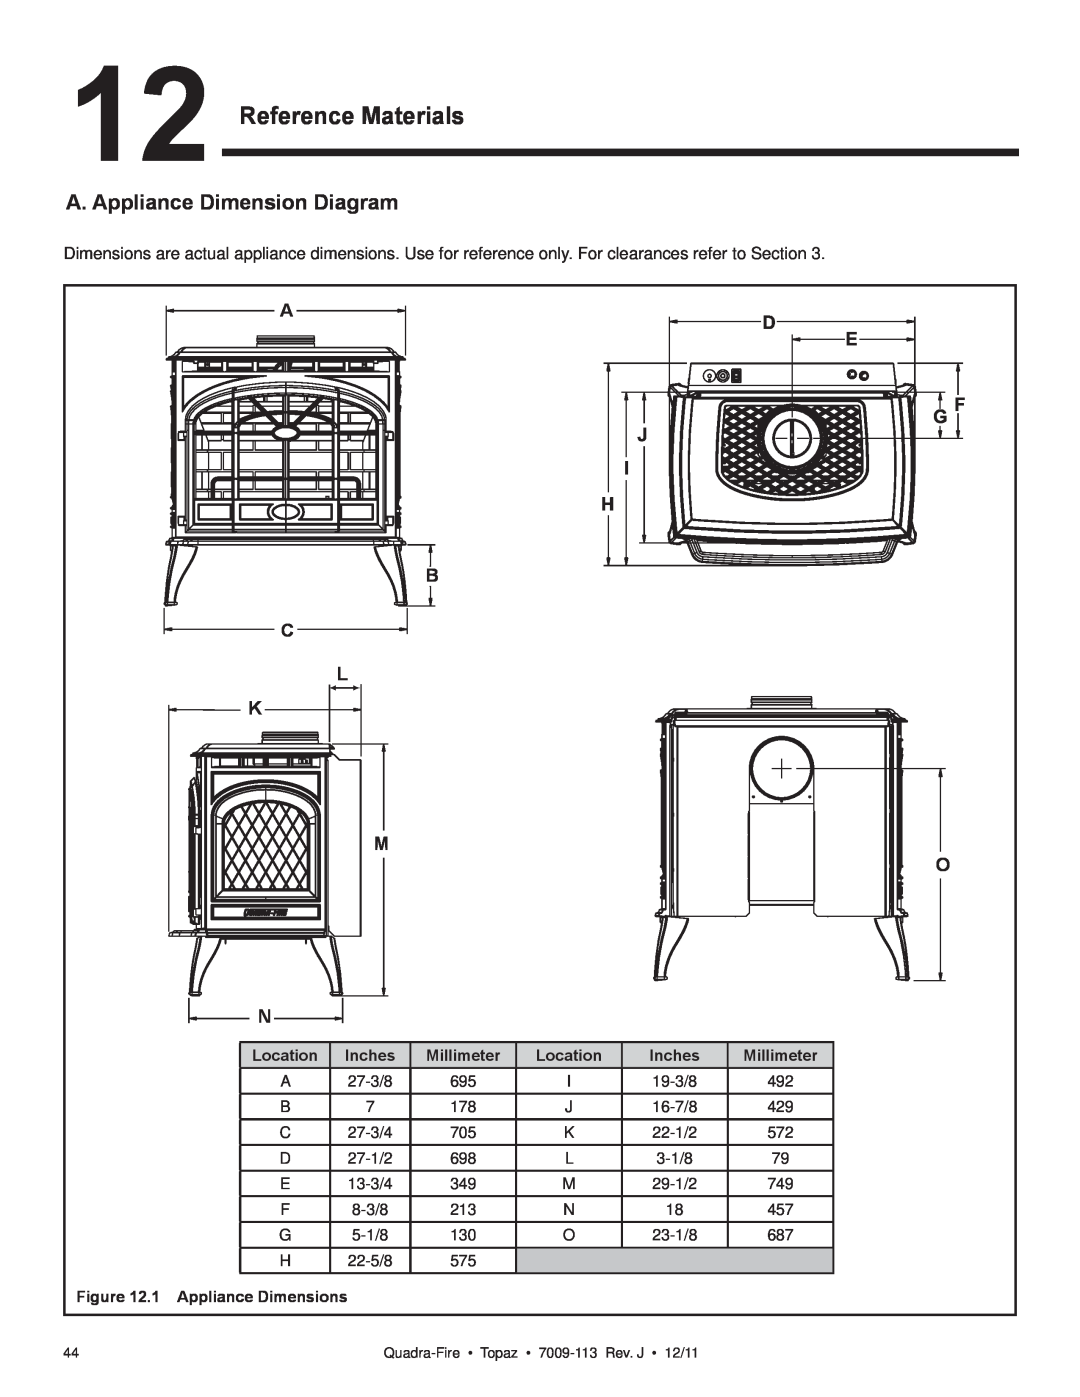 OmniTek 839-1340, 839-1290, 839-1320 owner manual Reference Materials, A. Appliance Dimension Diagram 